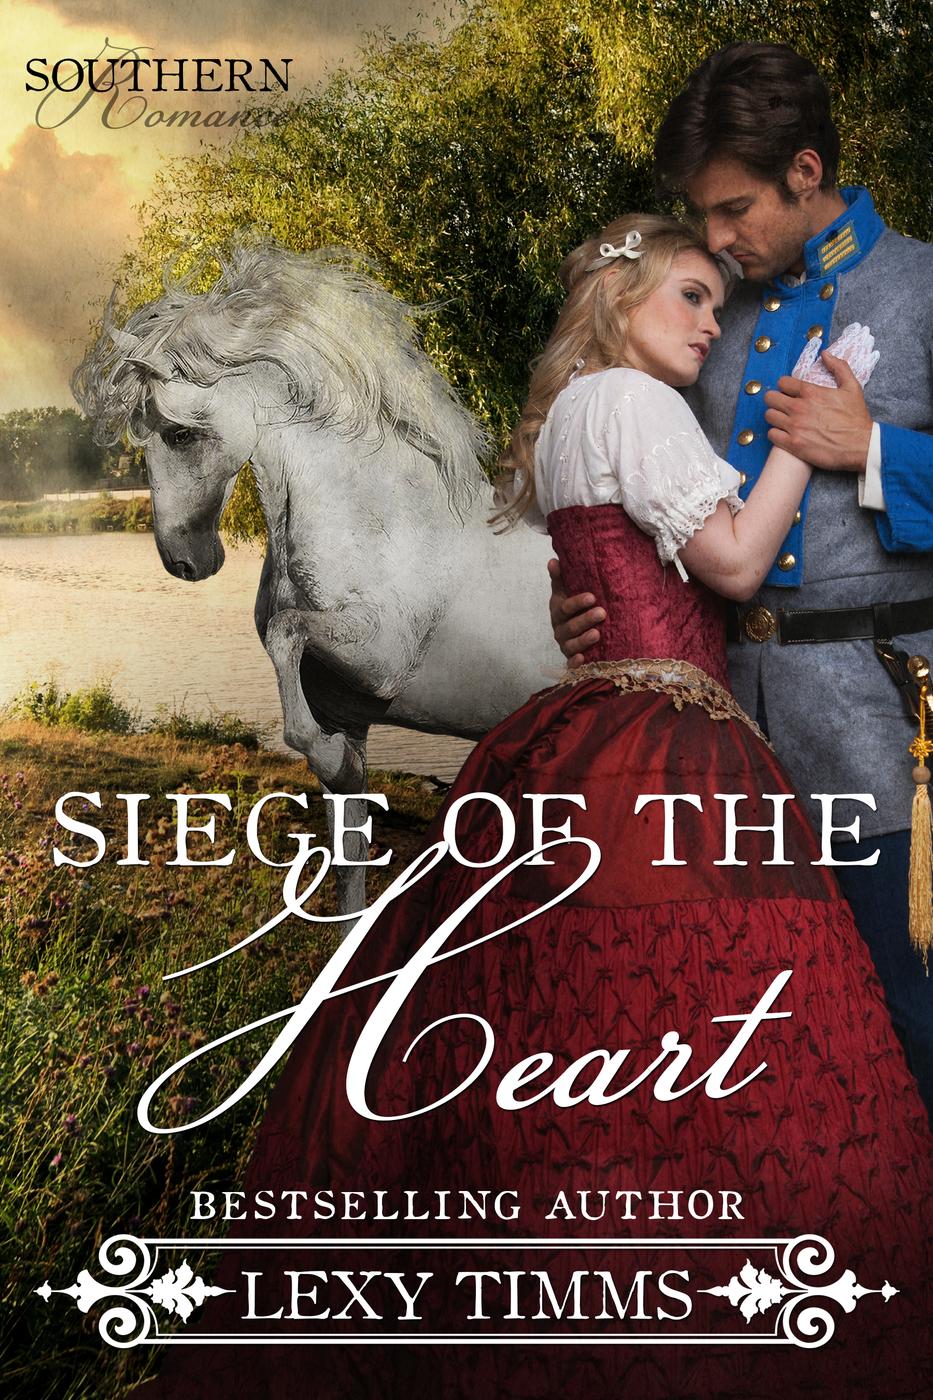 Siege of the Heart (Southern Romance Series, #2) by Lexy Timms